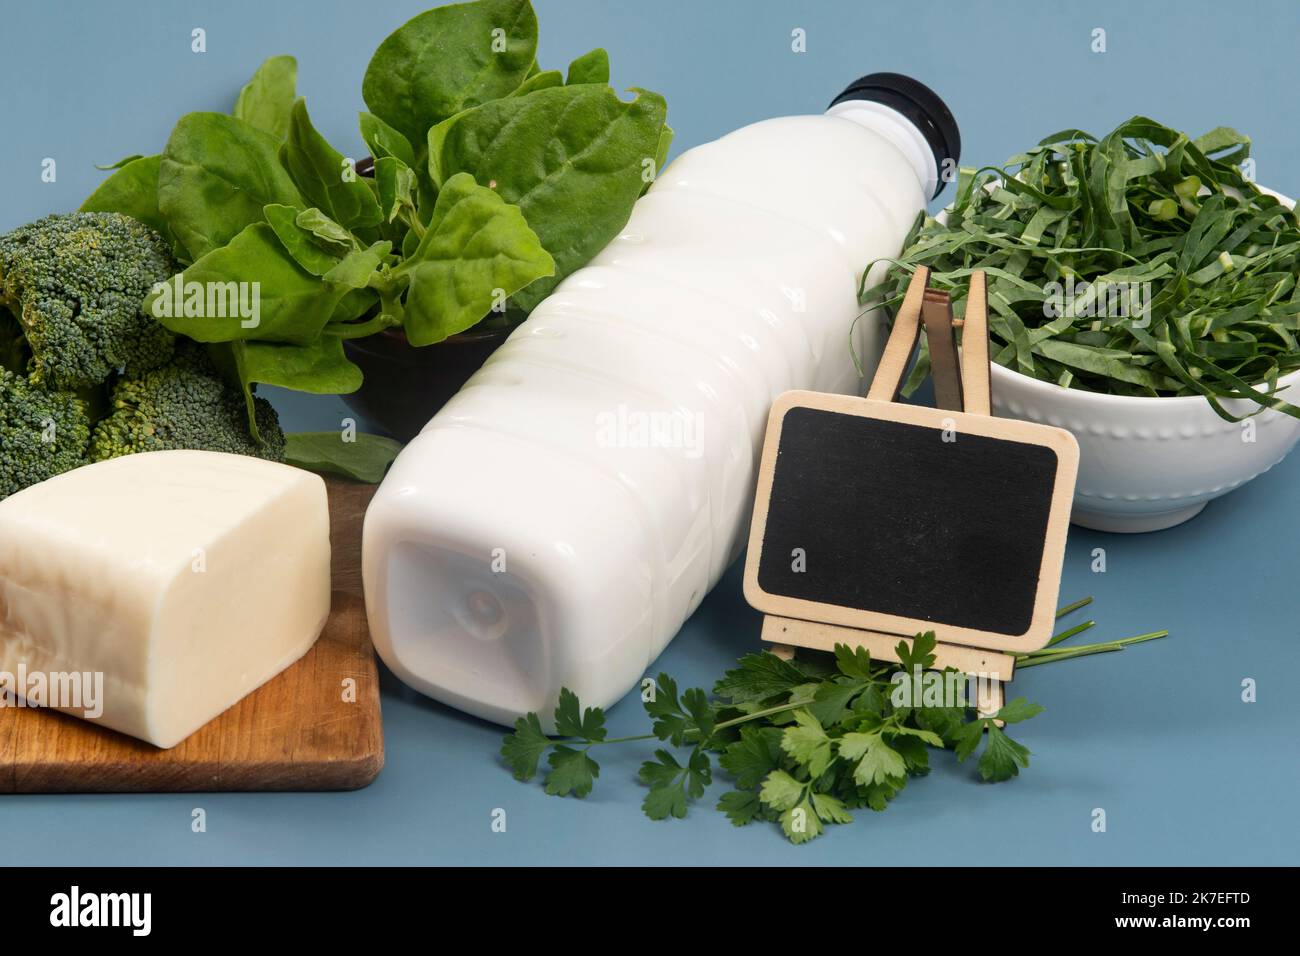 main sources of calcium for the body to help fight osteoporosis. Stock Photo